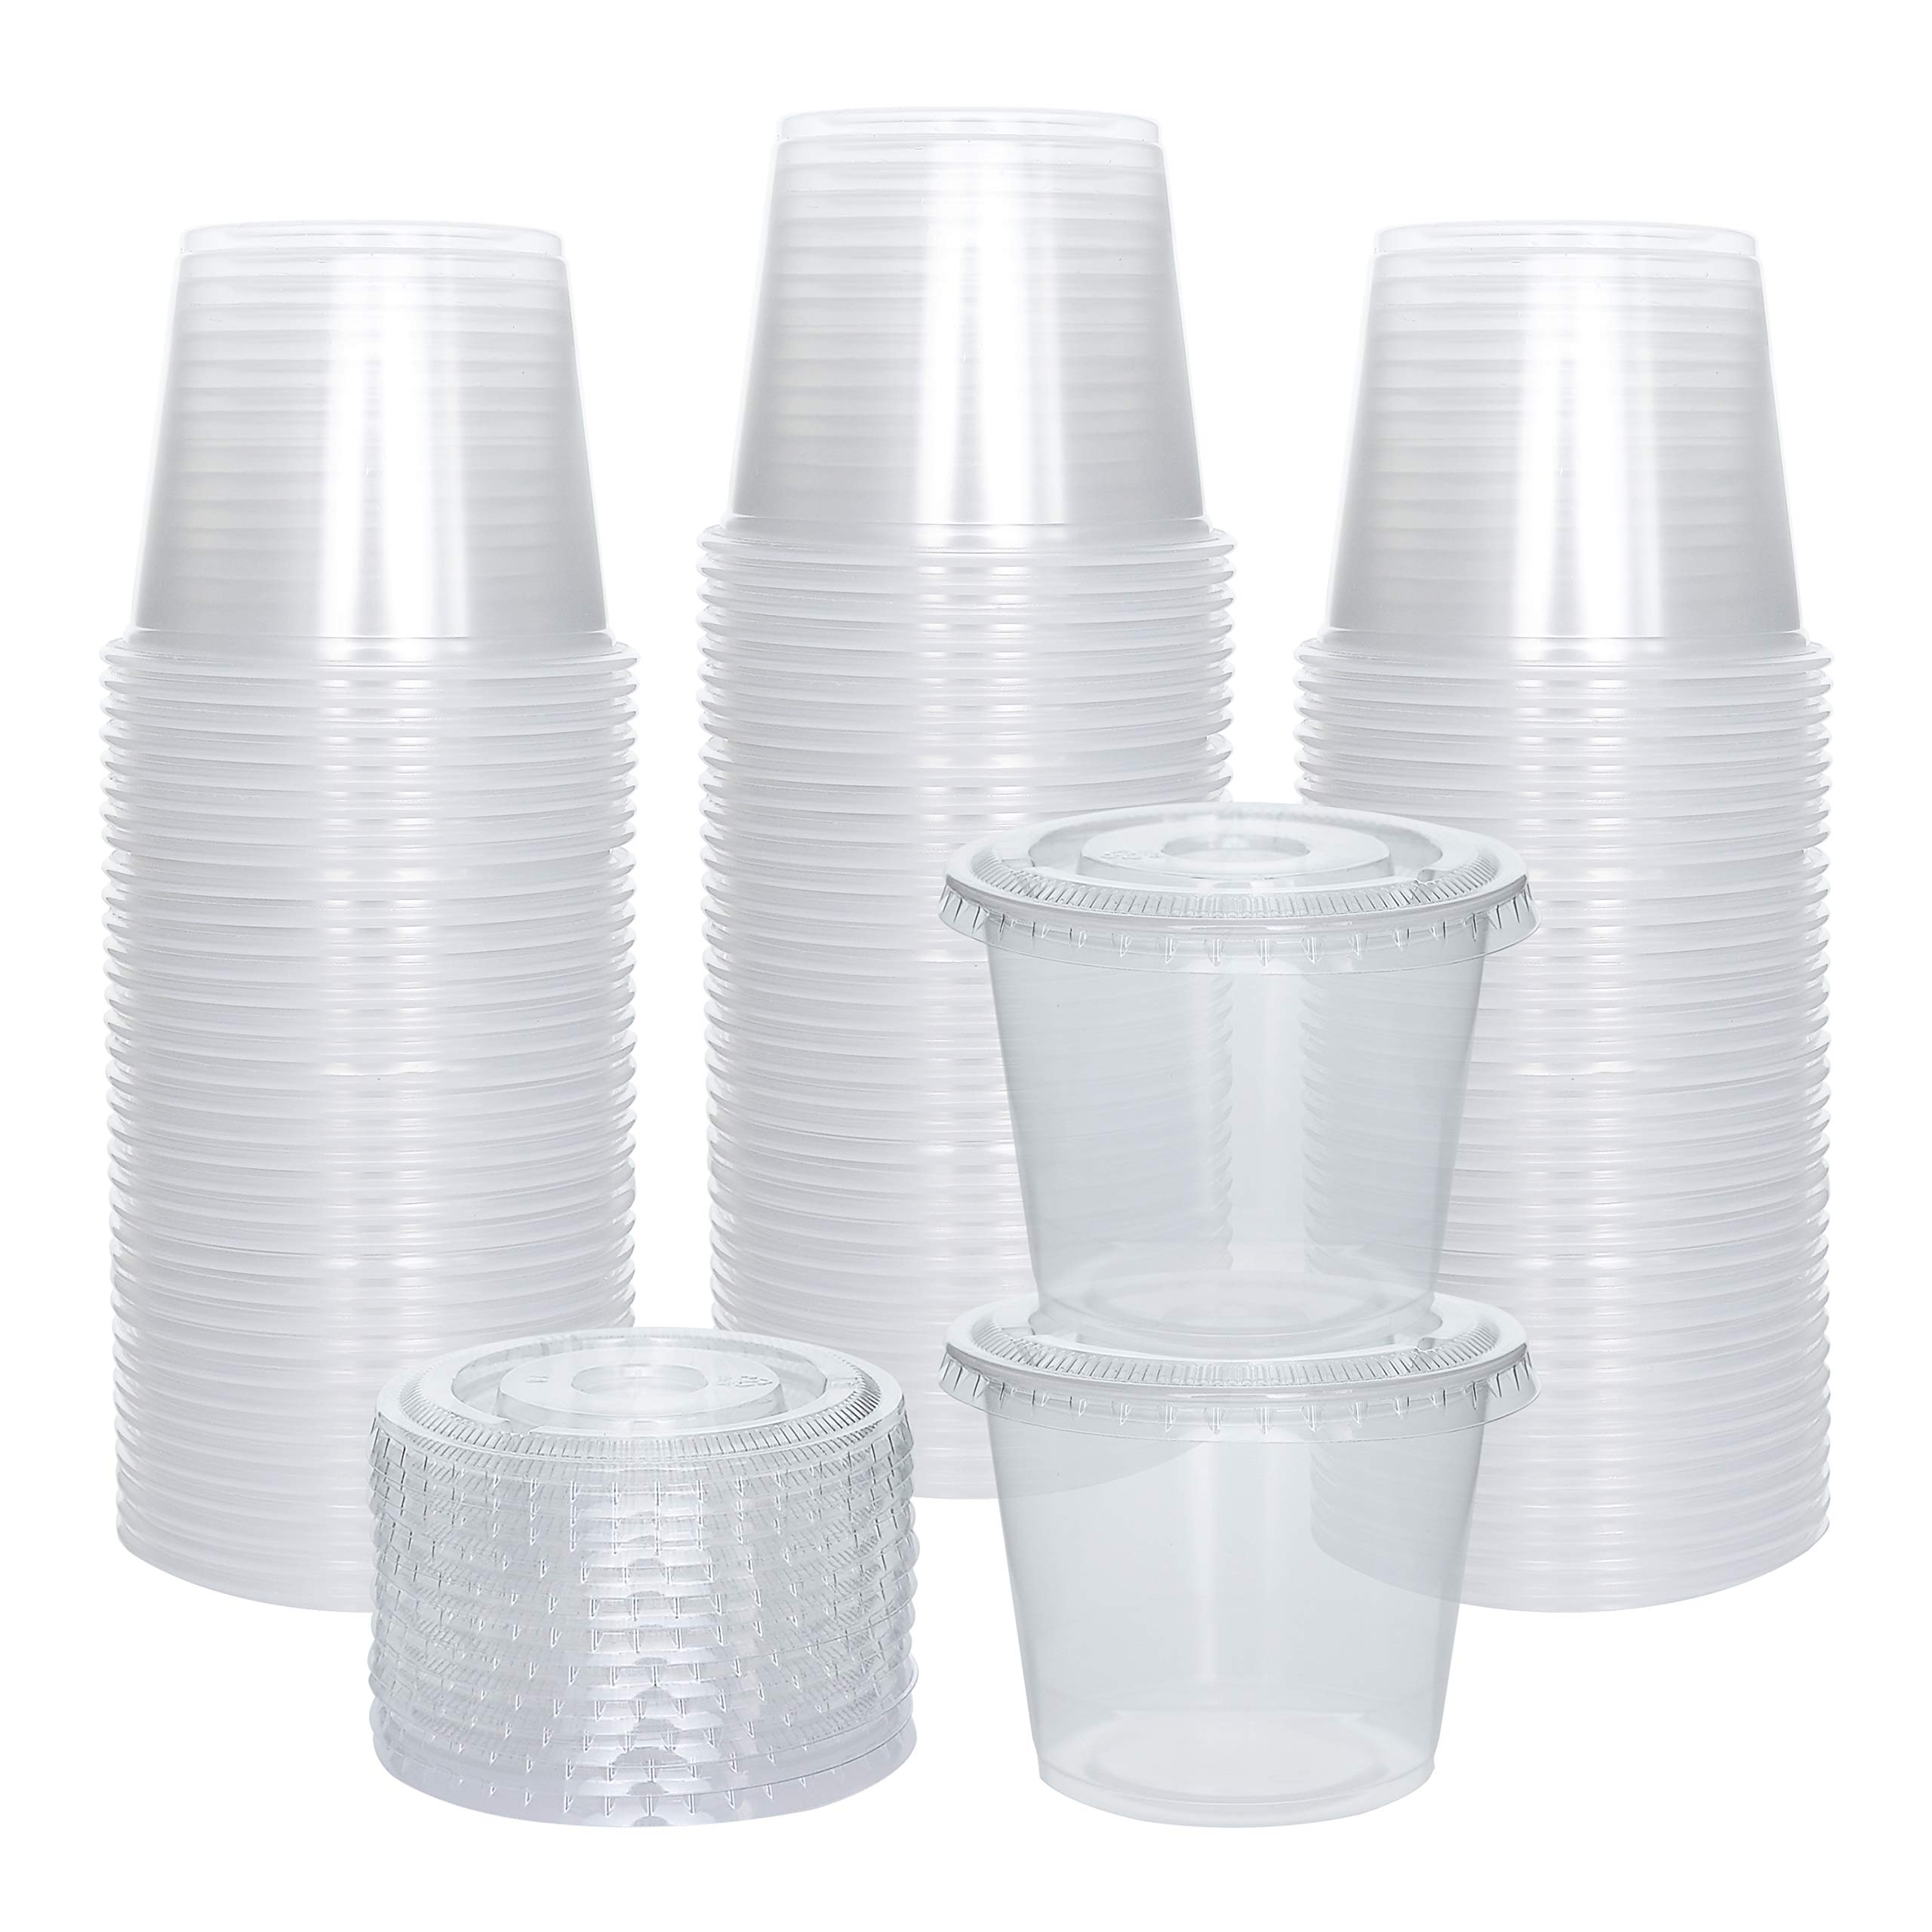 NRlinX 50 Sets - 5 oz. Plastic Condiments Containers with Hinged Lids   Multipurpose Small Plastic Containers for Sauce, Dip and Dressing - Jello  Shot Cups 5OZ